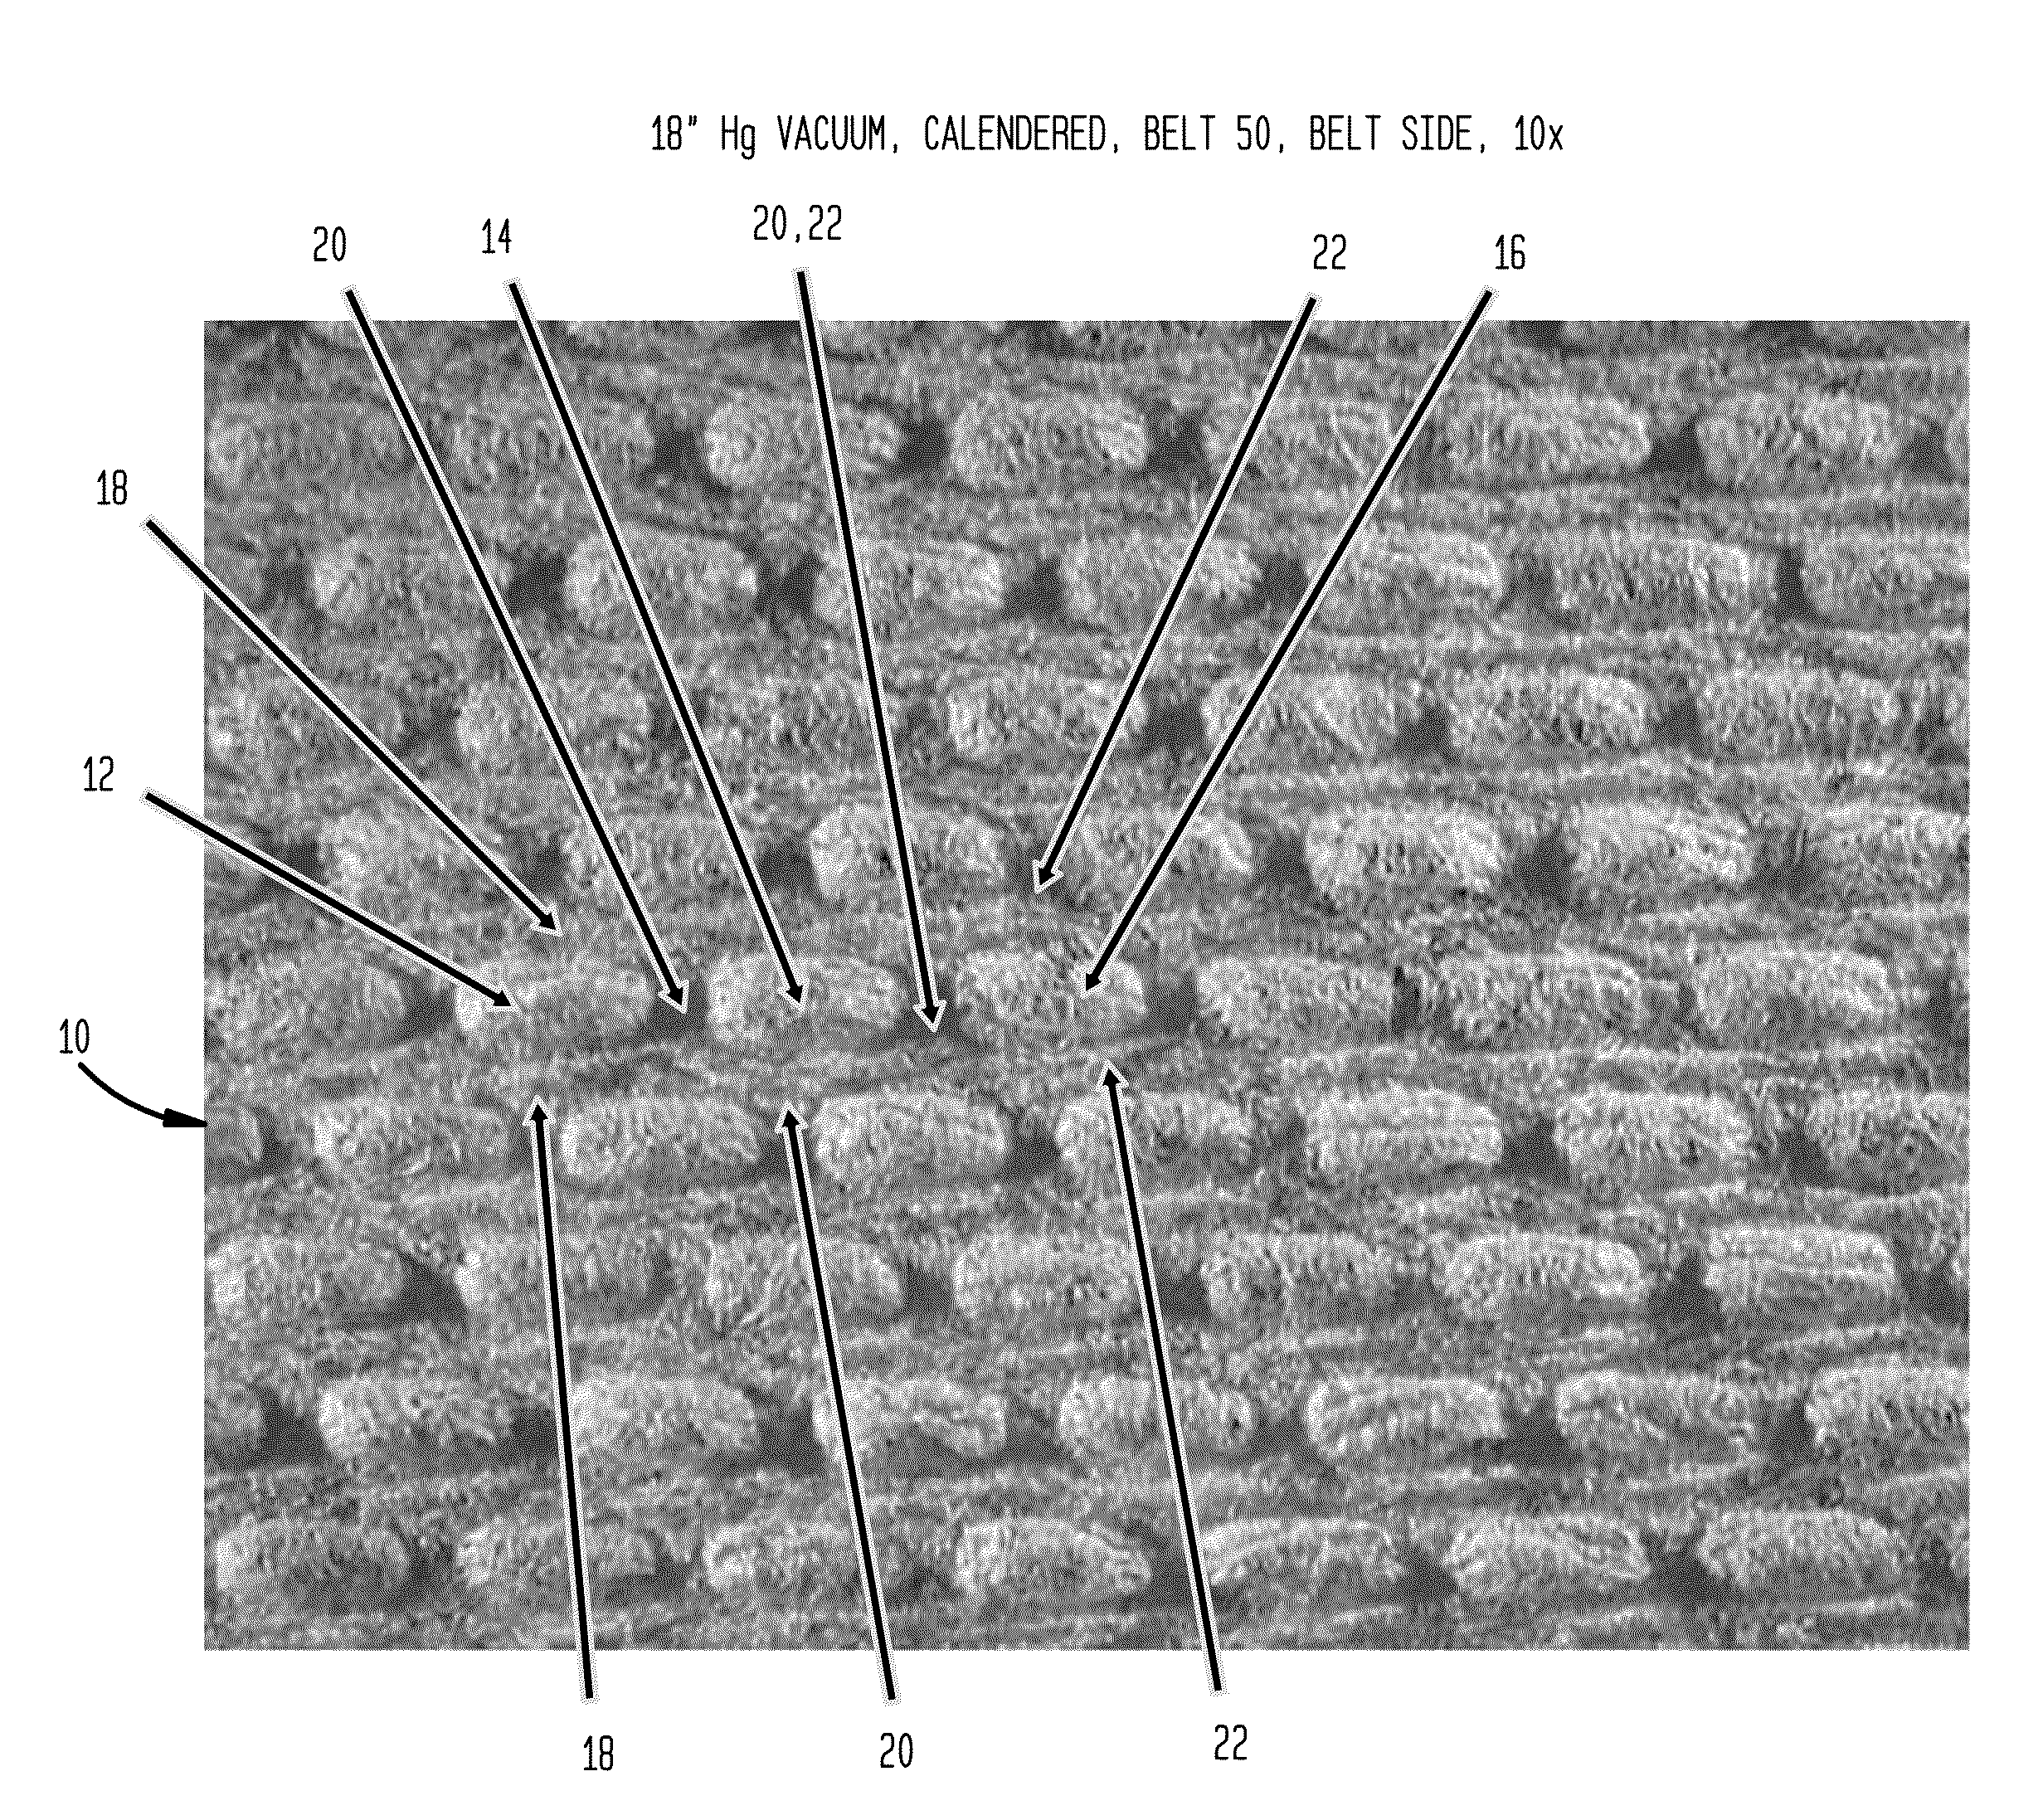 Belt-Creped, Variable Local Basis Weight Absorbent Sheet Prepared With Perforated Polymeric Belt